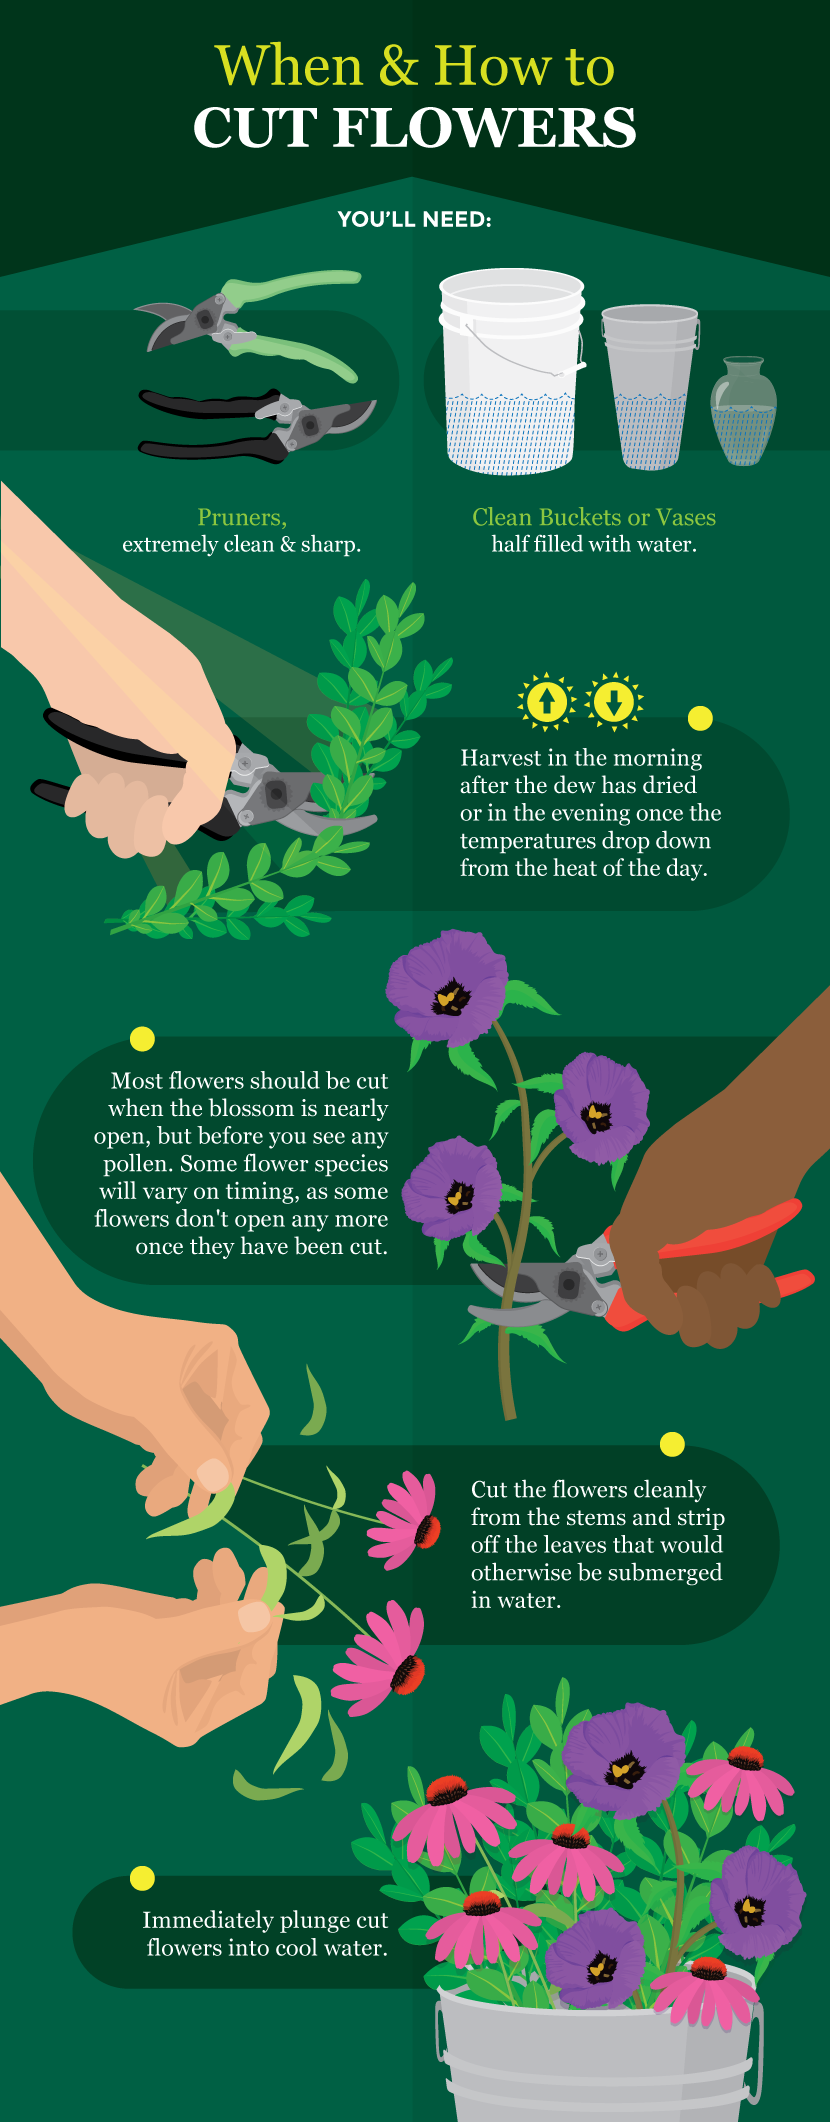 When and How to Cut Flowers - A Guide to Growing Your Own Cutting Flowers